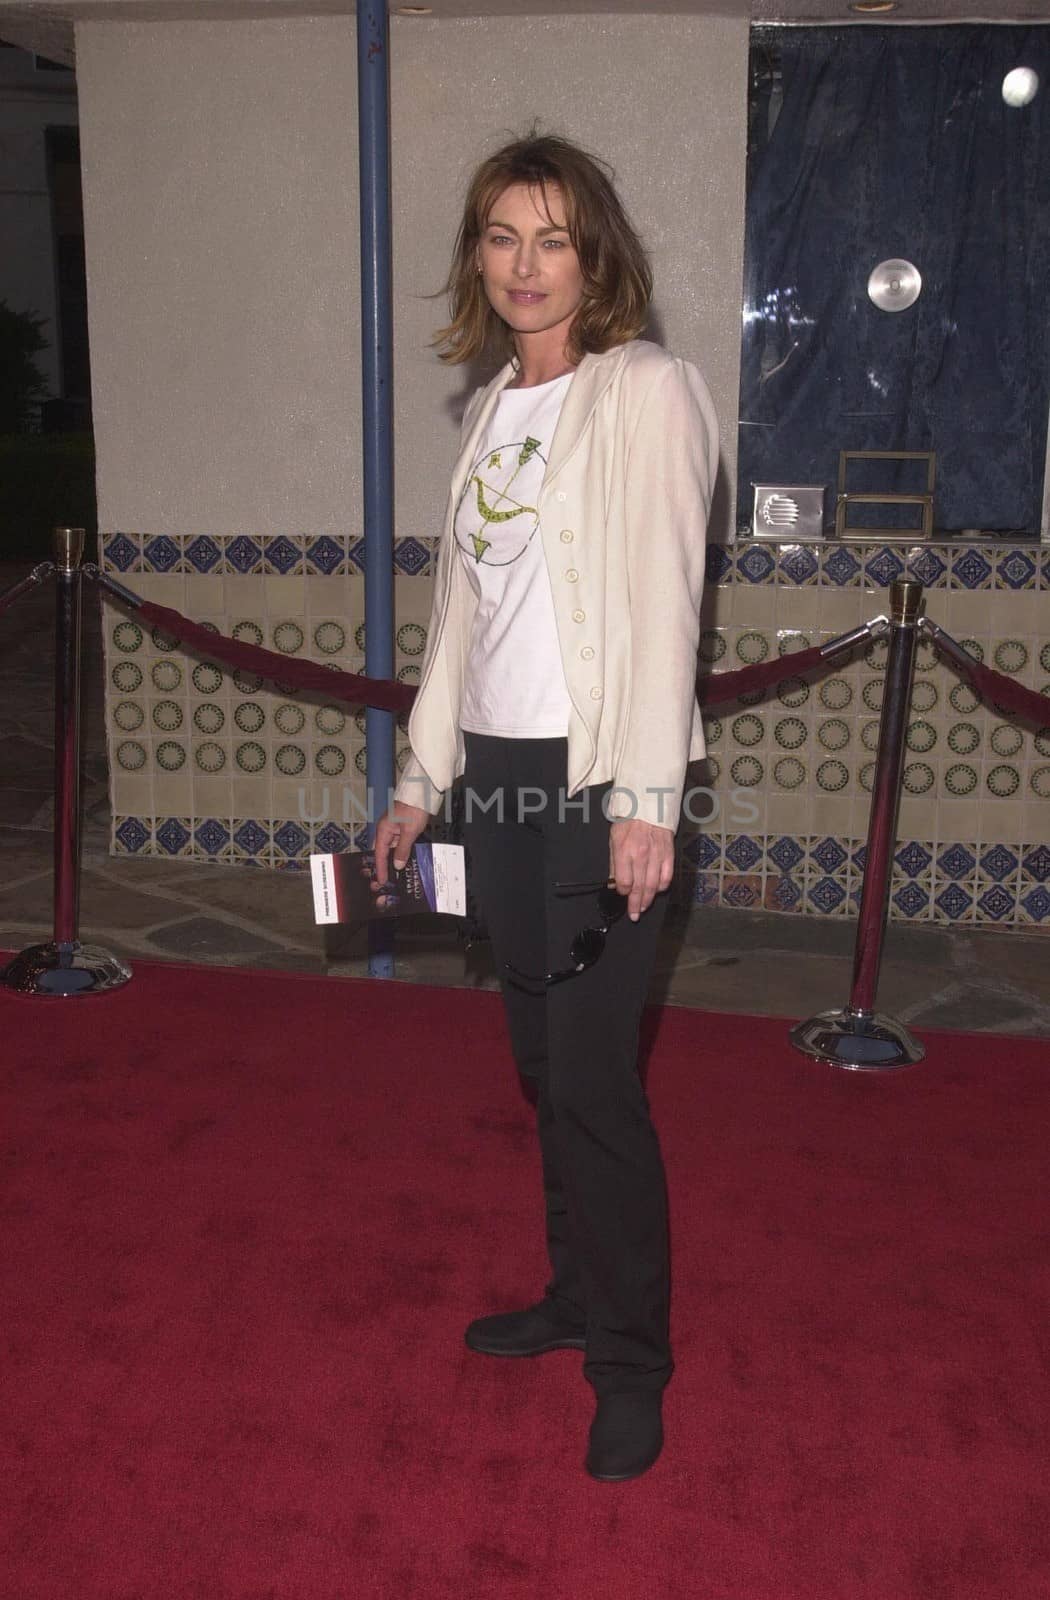 Joanna Pacula at the premiere of "Space Cowboys" in Westwood. 08-01-00